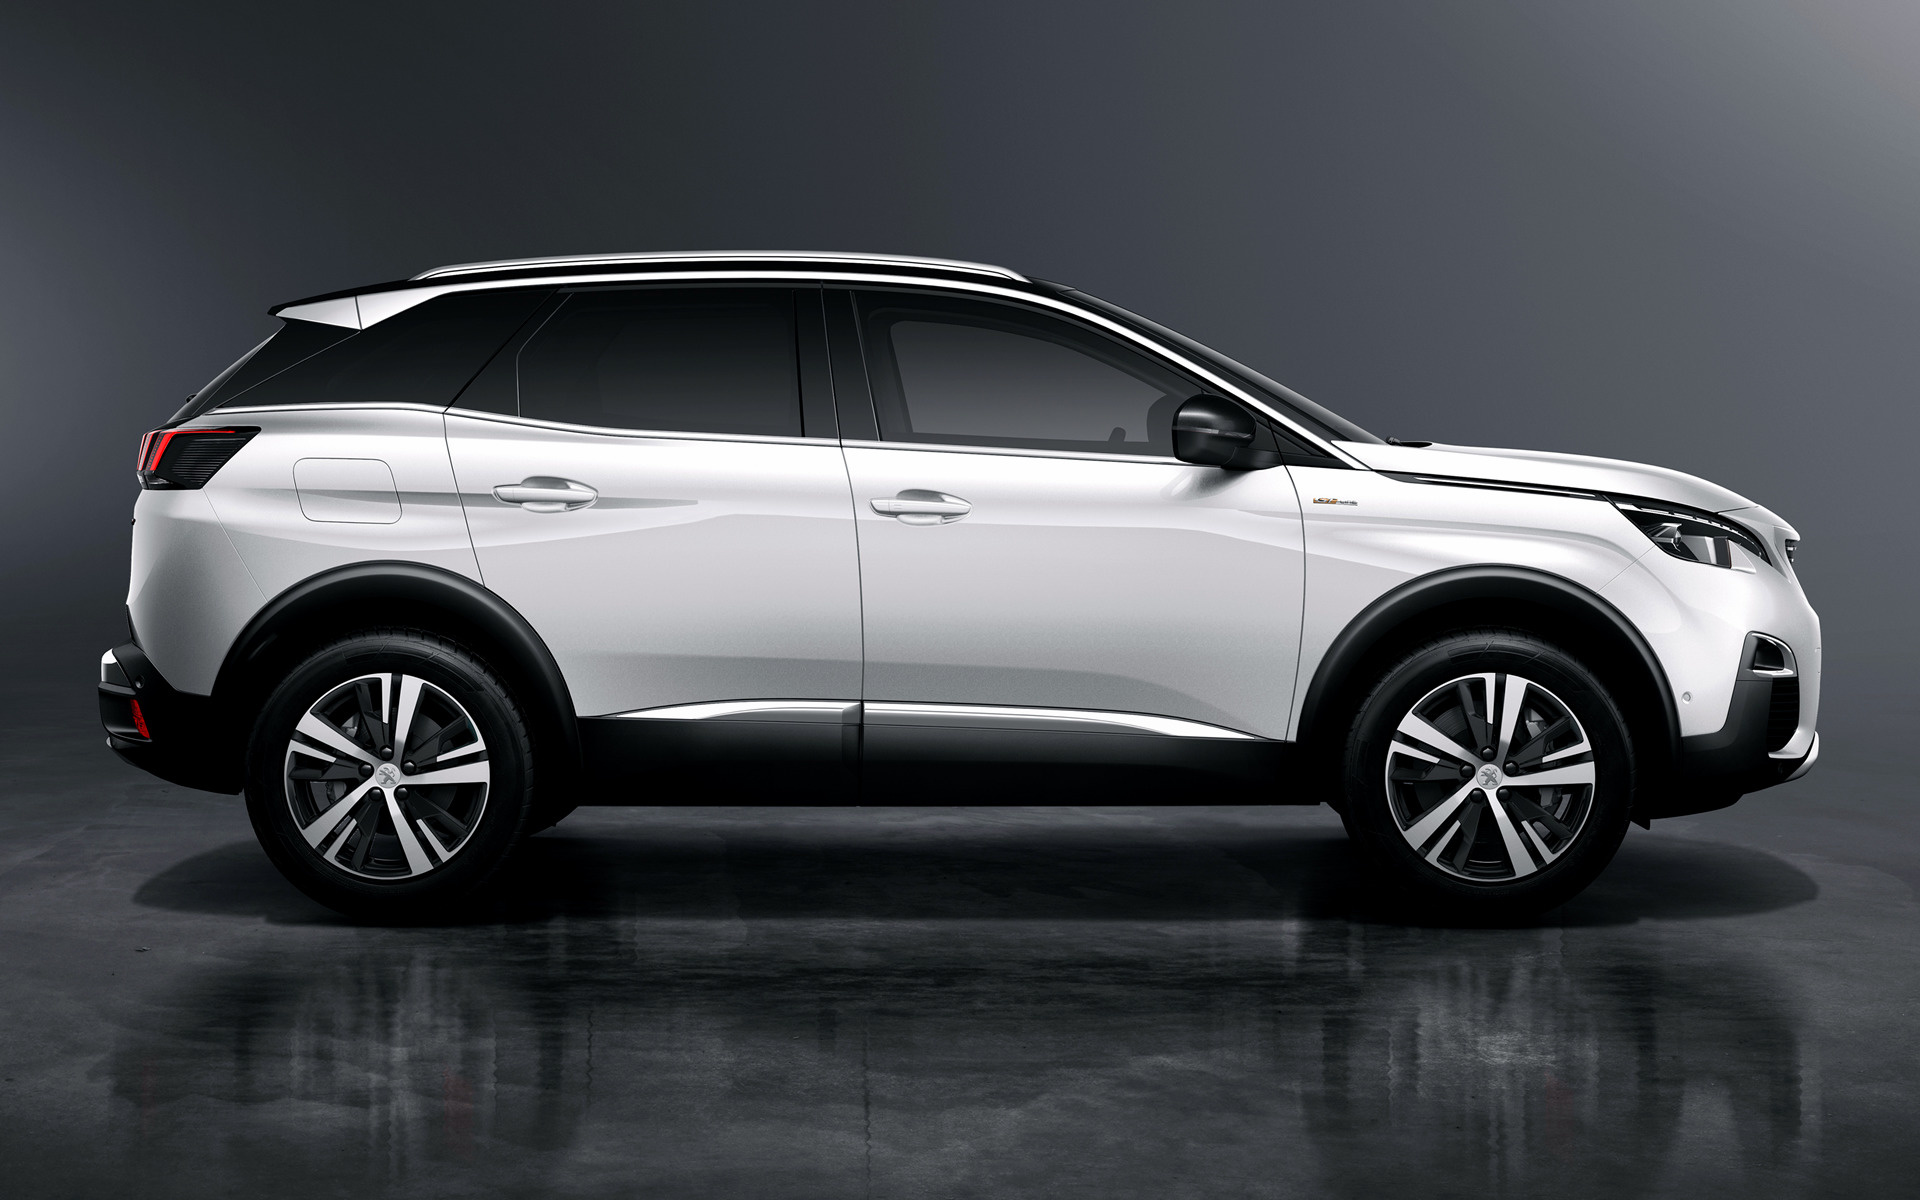 2016 Peugeot 3008 GT Line - Wallpapers and HD Images | Car Pixel1920 x 1200